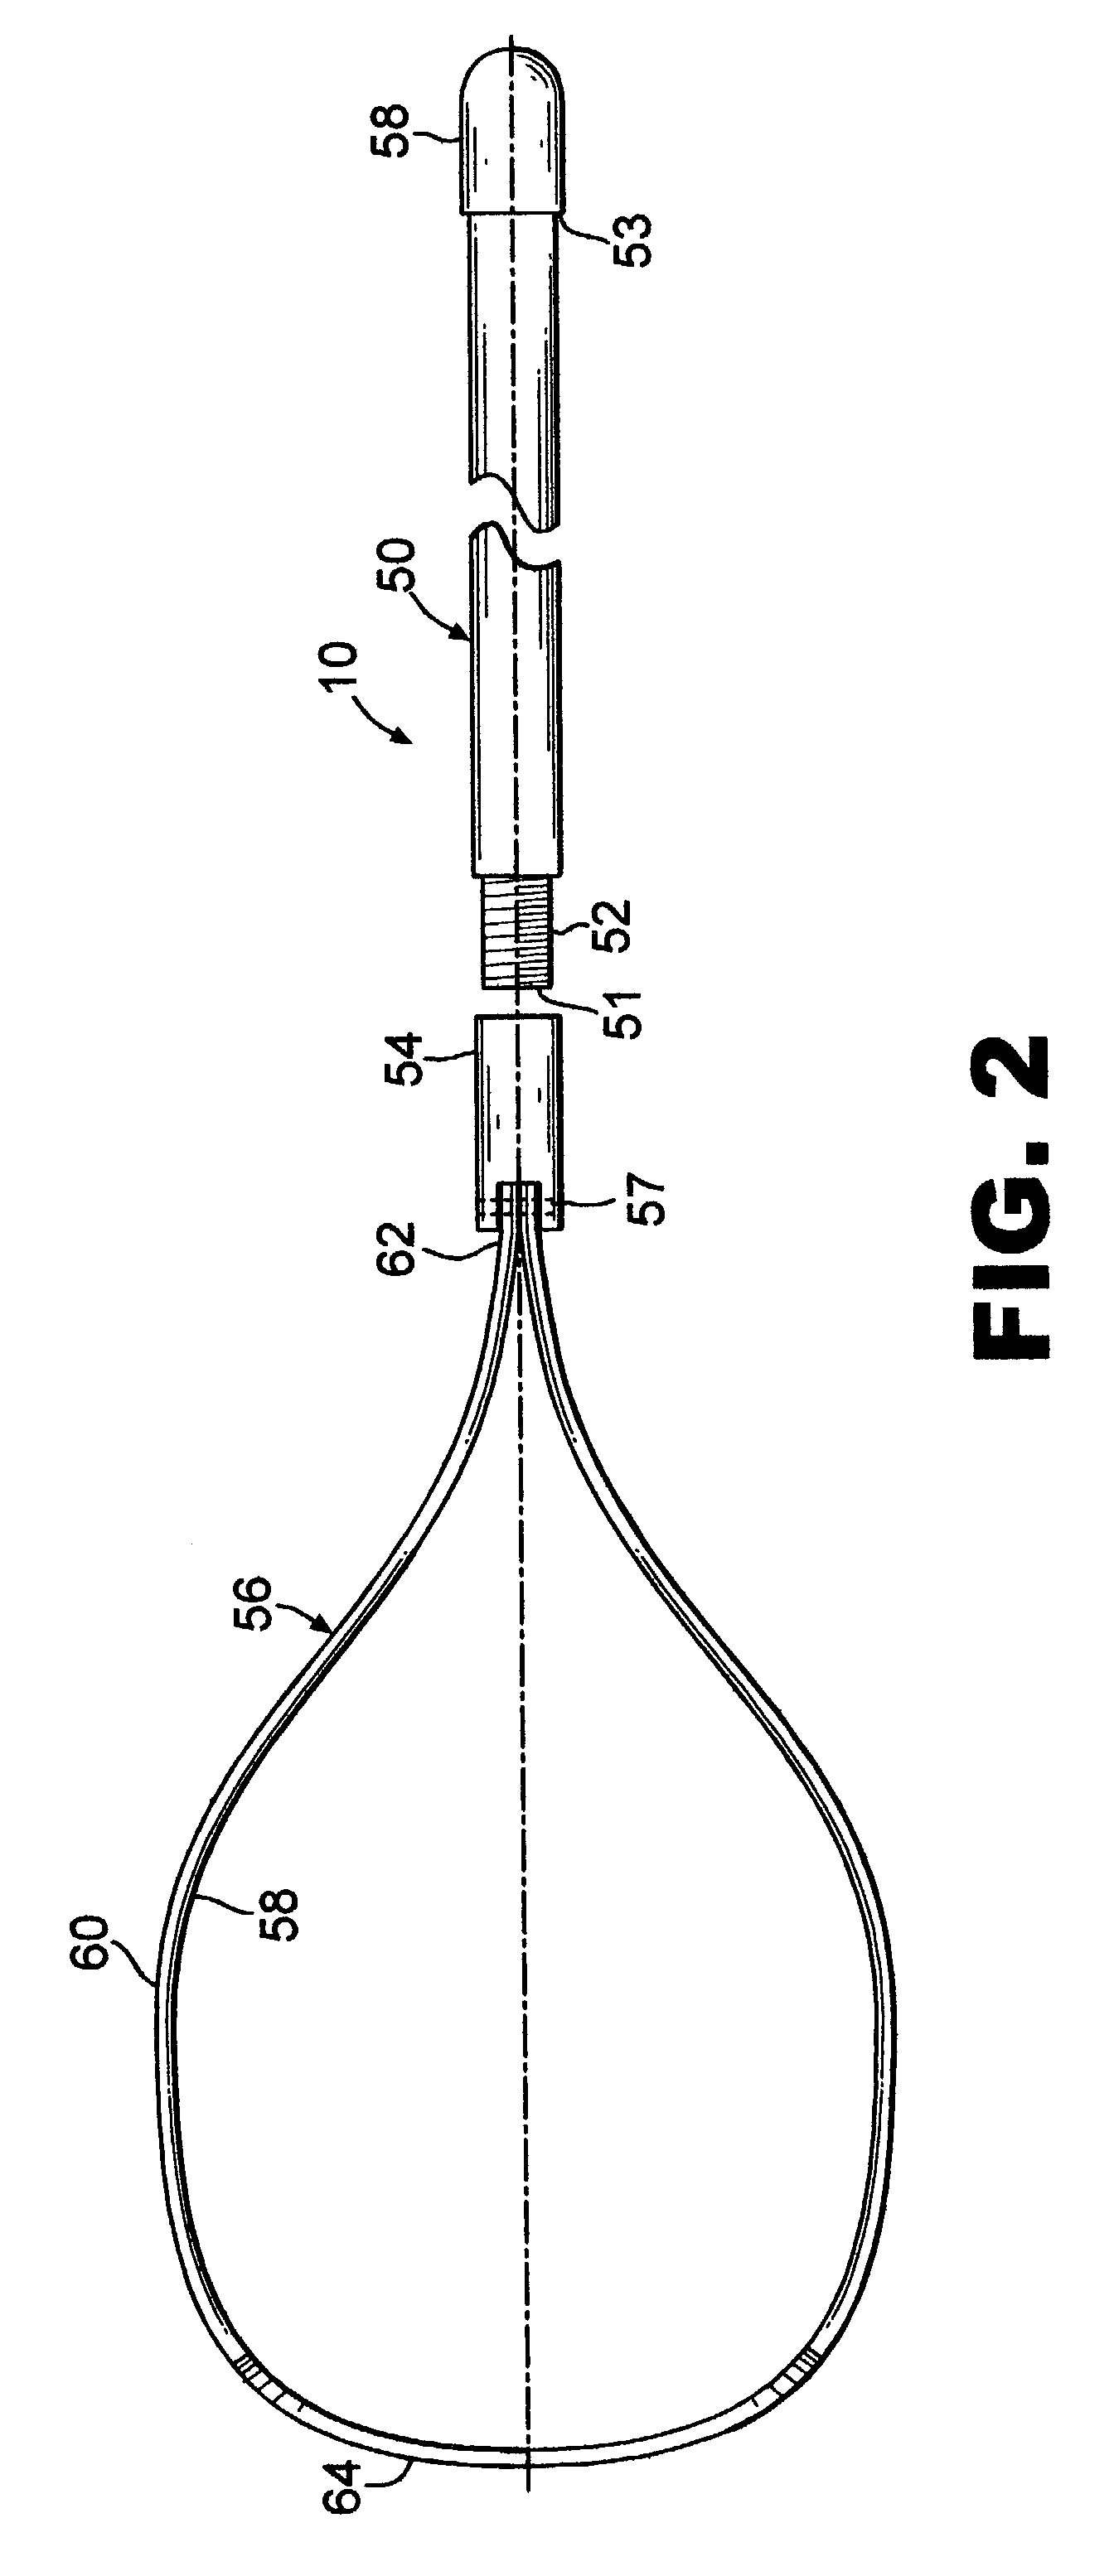 Method and apparatus for relieving leg cramps and massaging muscles